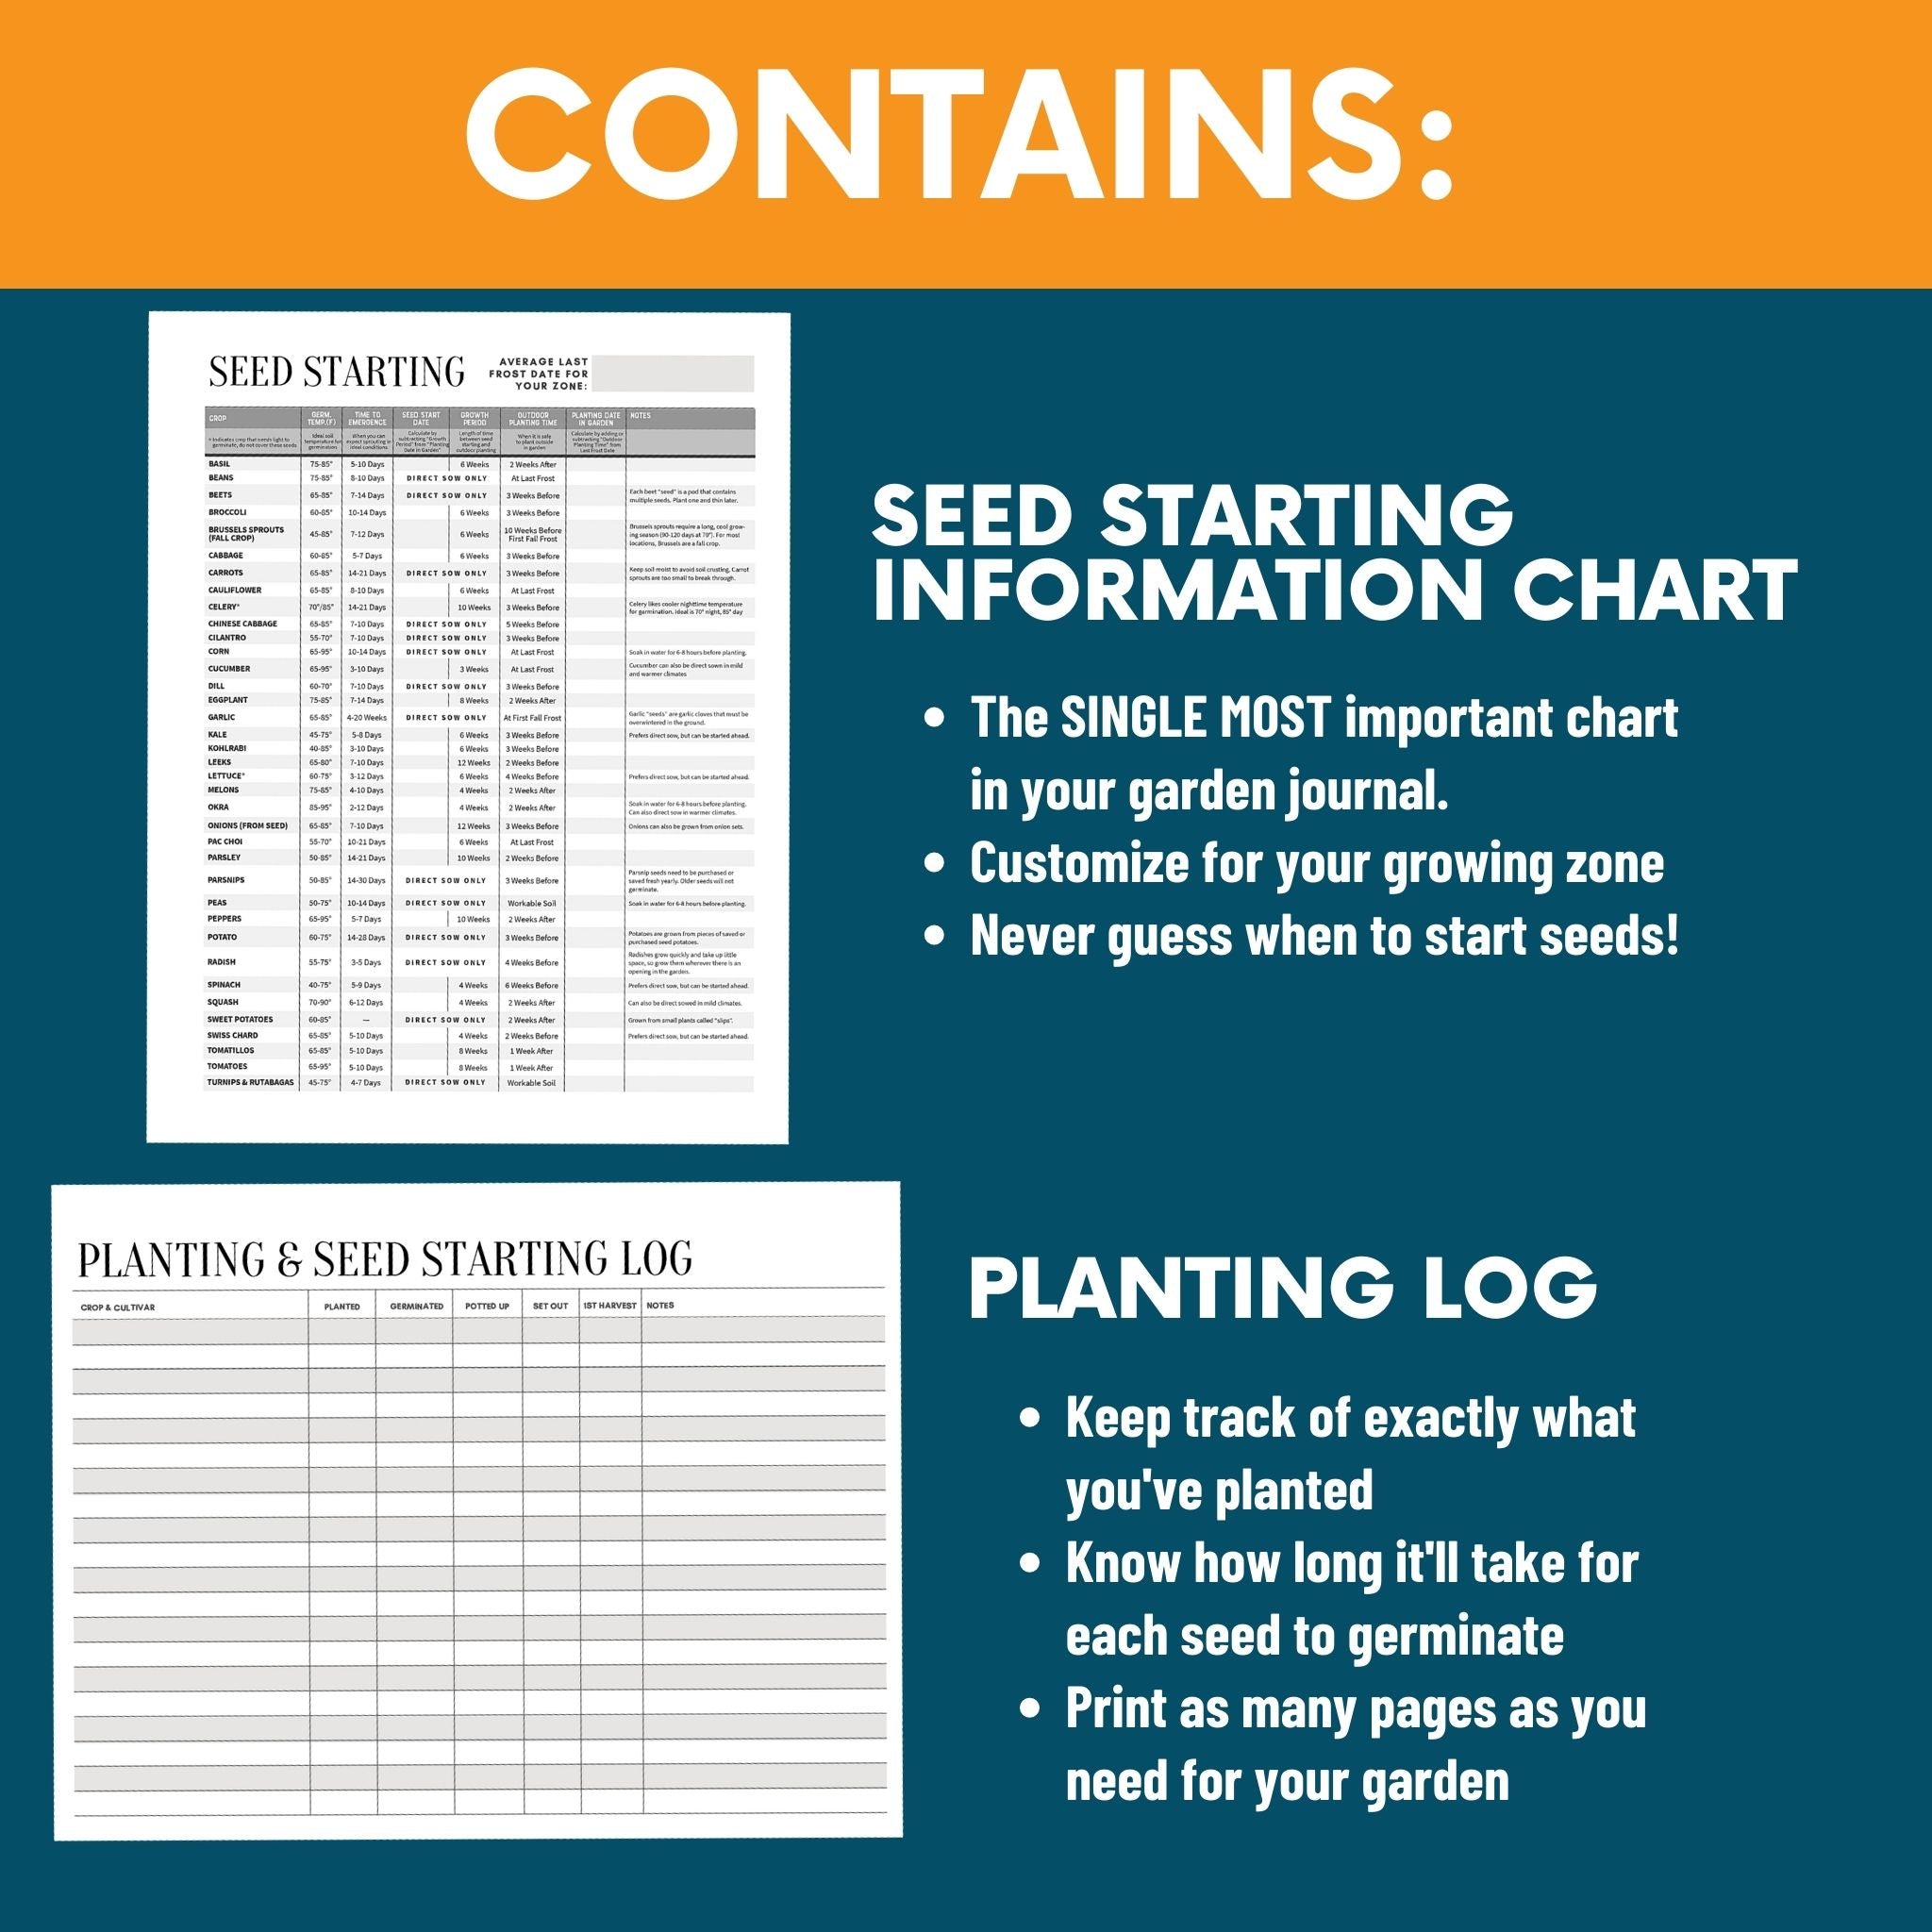 Contains: Seed Starting Information Chart (The SINGLE MOST important chart in your garden journal. Customize for your growing zone. Never guess when to start seeds!). Planting log (Keep track of exactly what you've planted. Know how long it'll take for each seed to germinate. Print as many pages as you need for your garden).